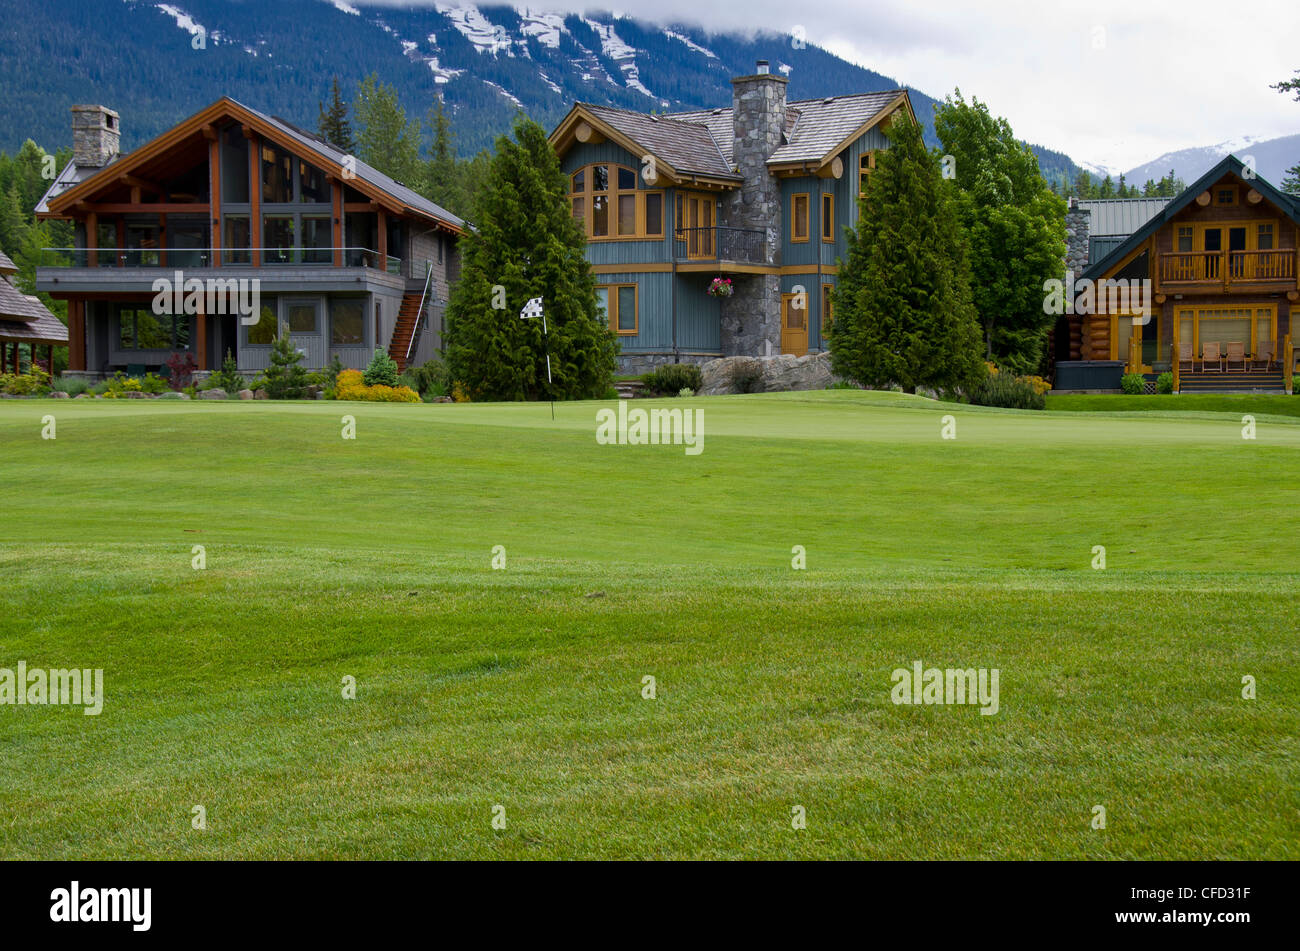 Niklaus North golf course with green side homes, Whistler, British Columbia, Canada Stock Photo